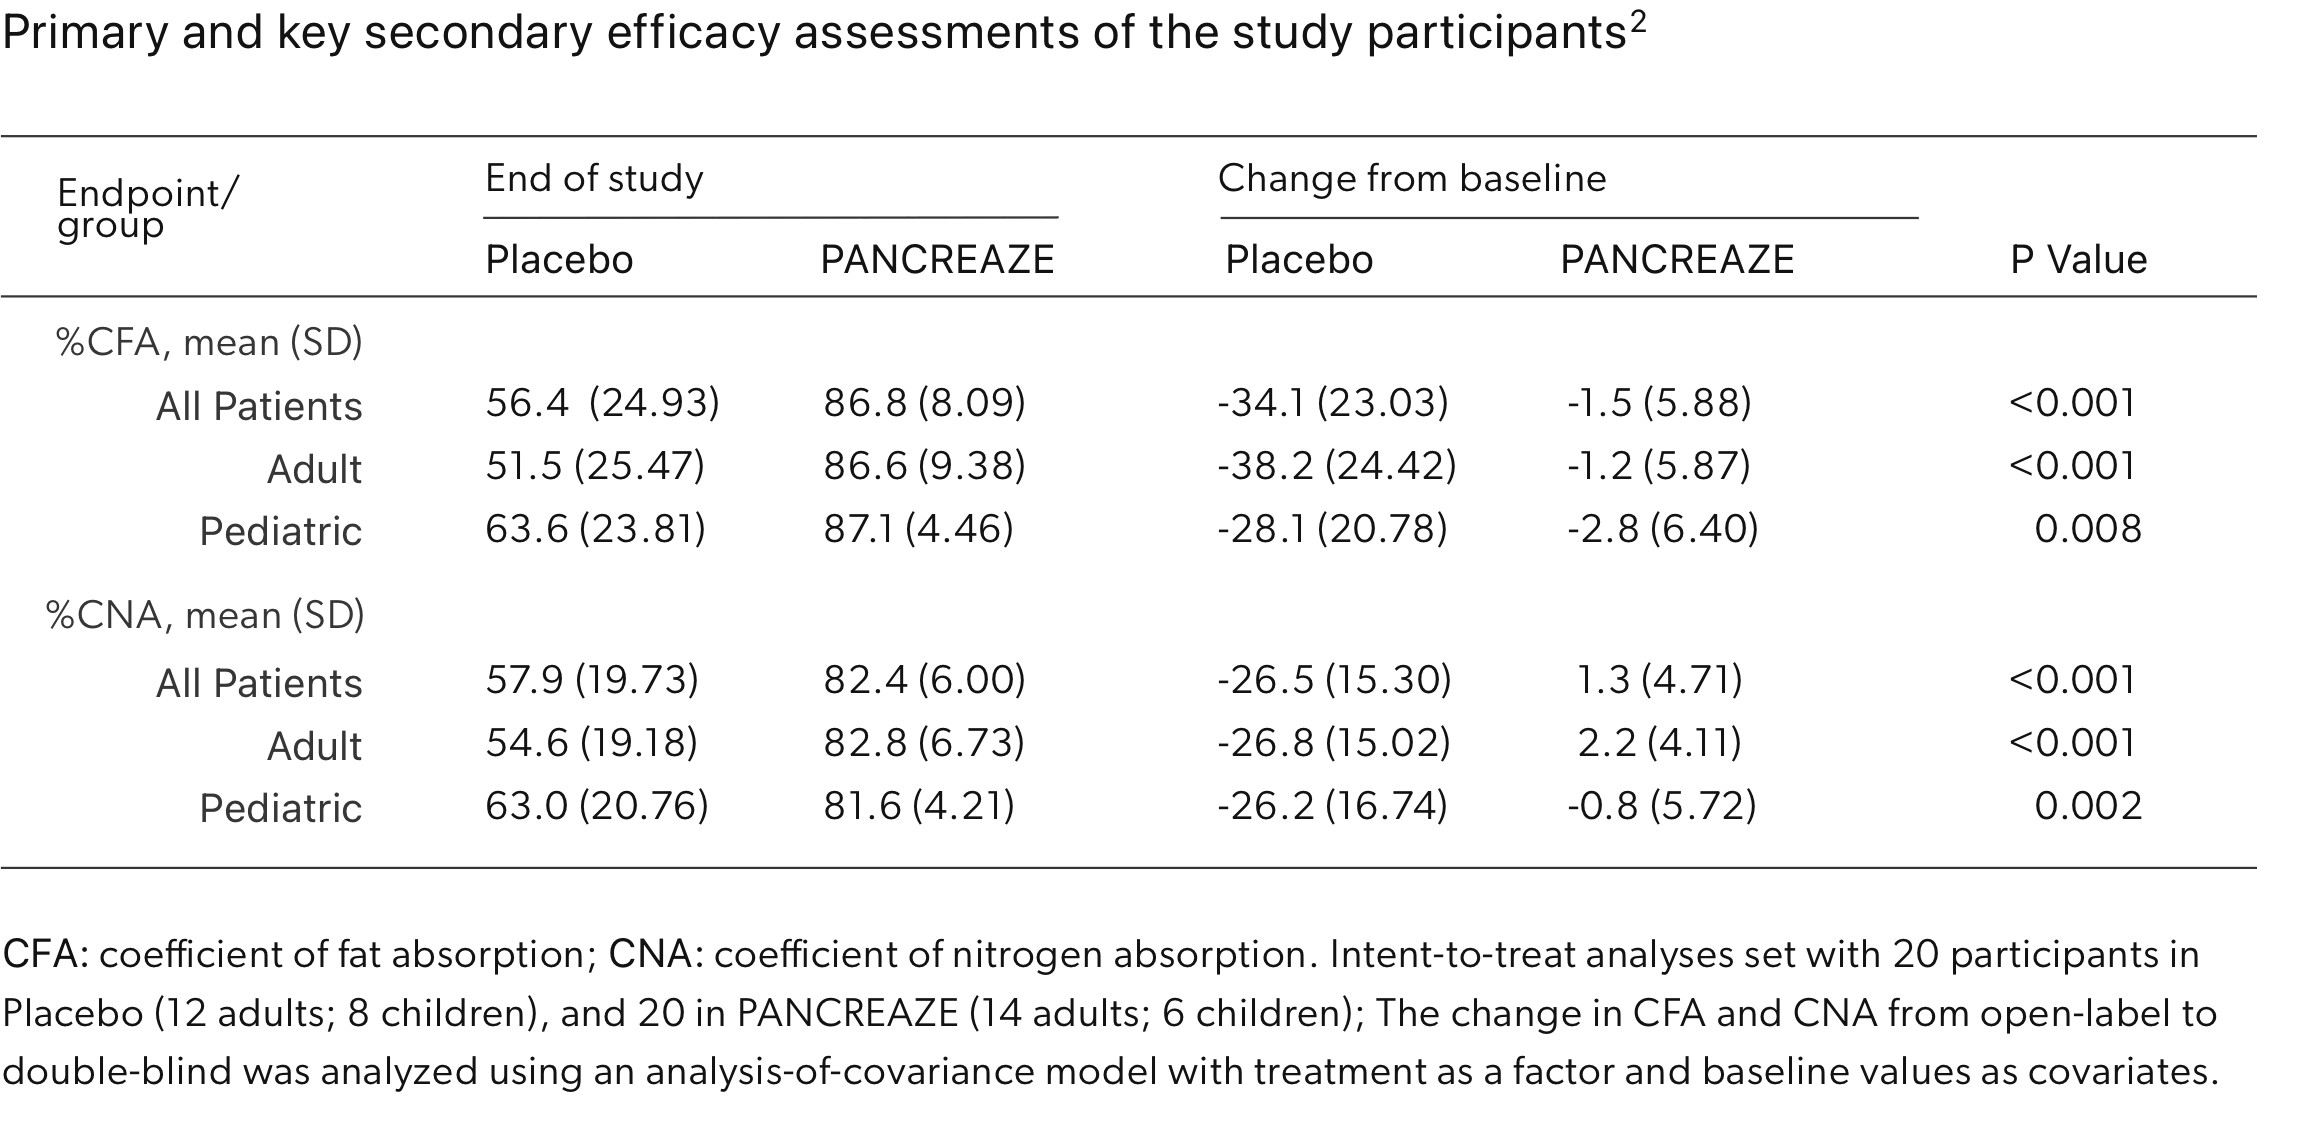 Primary and key secondary efficacy assessments of the study participants chart.